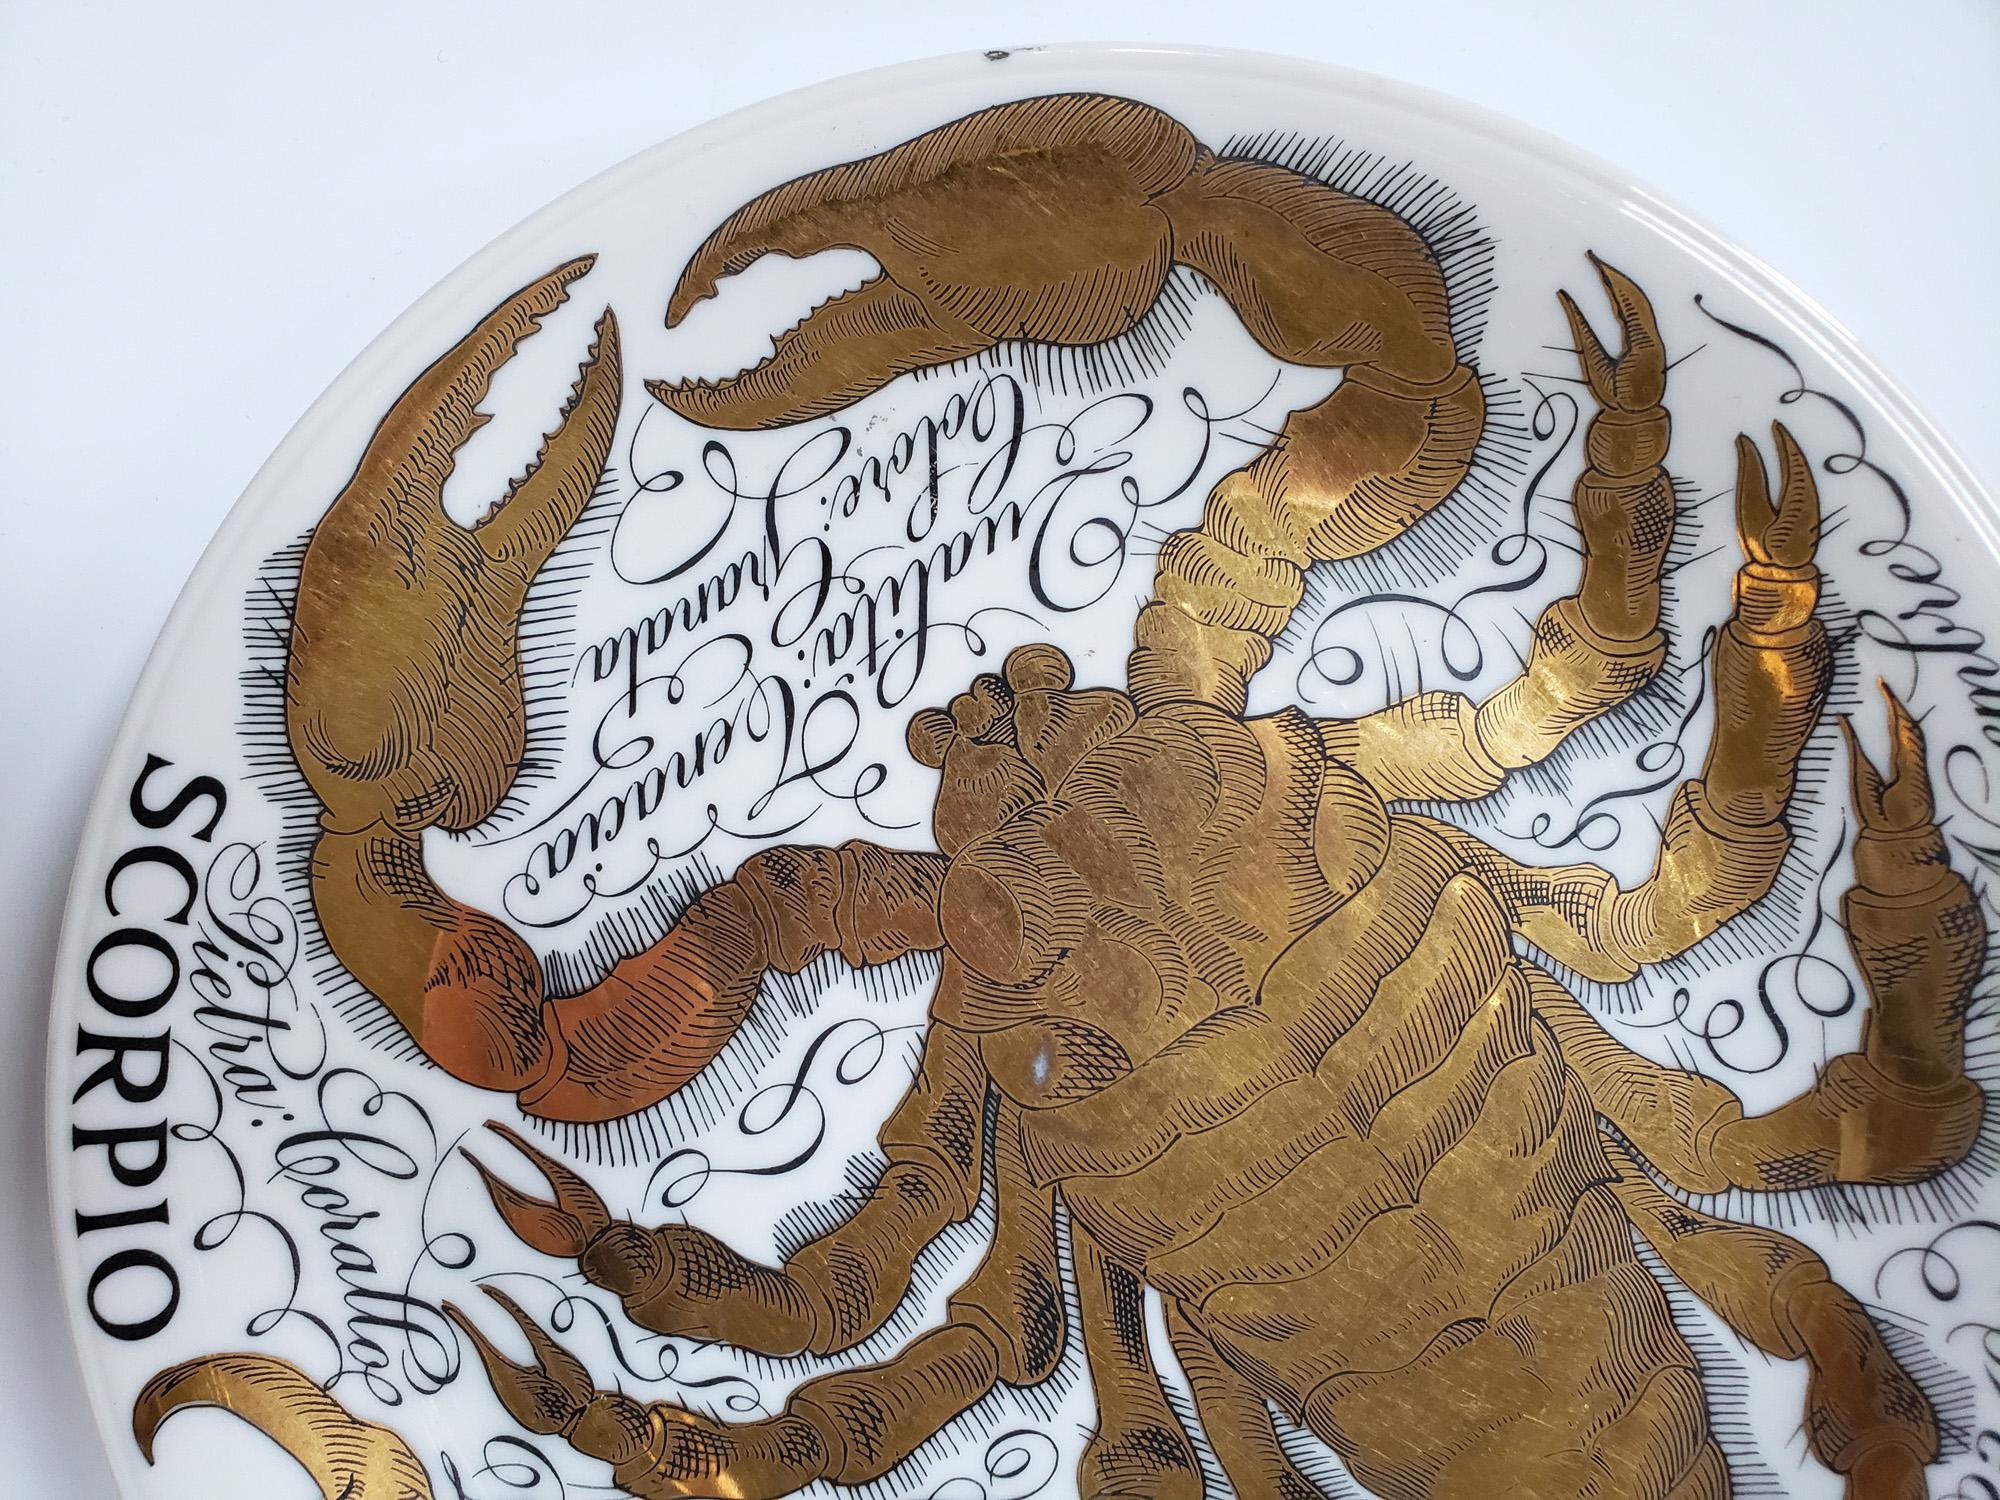 Vintage Piero Fornasetti Porcelain zodiac plate,
Scorpio,
Astrali Pattern,
Made for Corisia,
Dated 1967, No 4.

The plate for the sign SCORPIO is dated 1974 and is numbered #4. The plate depicts the Astrological Zodiac sign Cancer which is